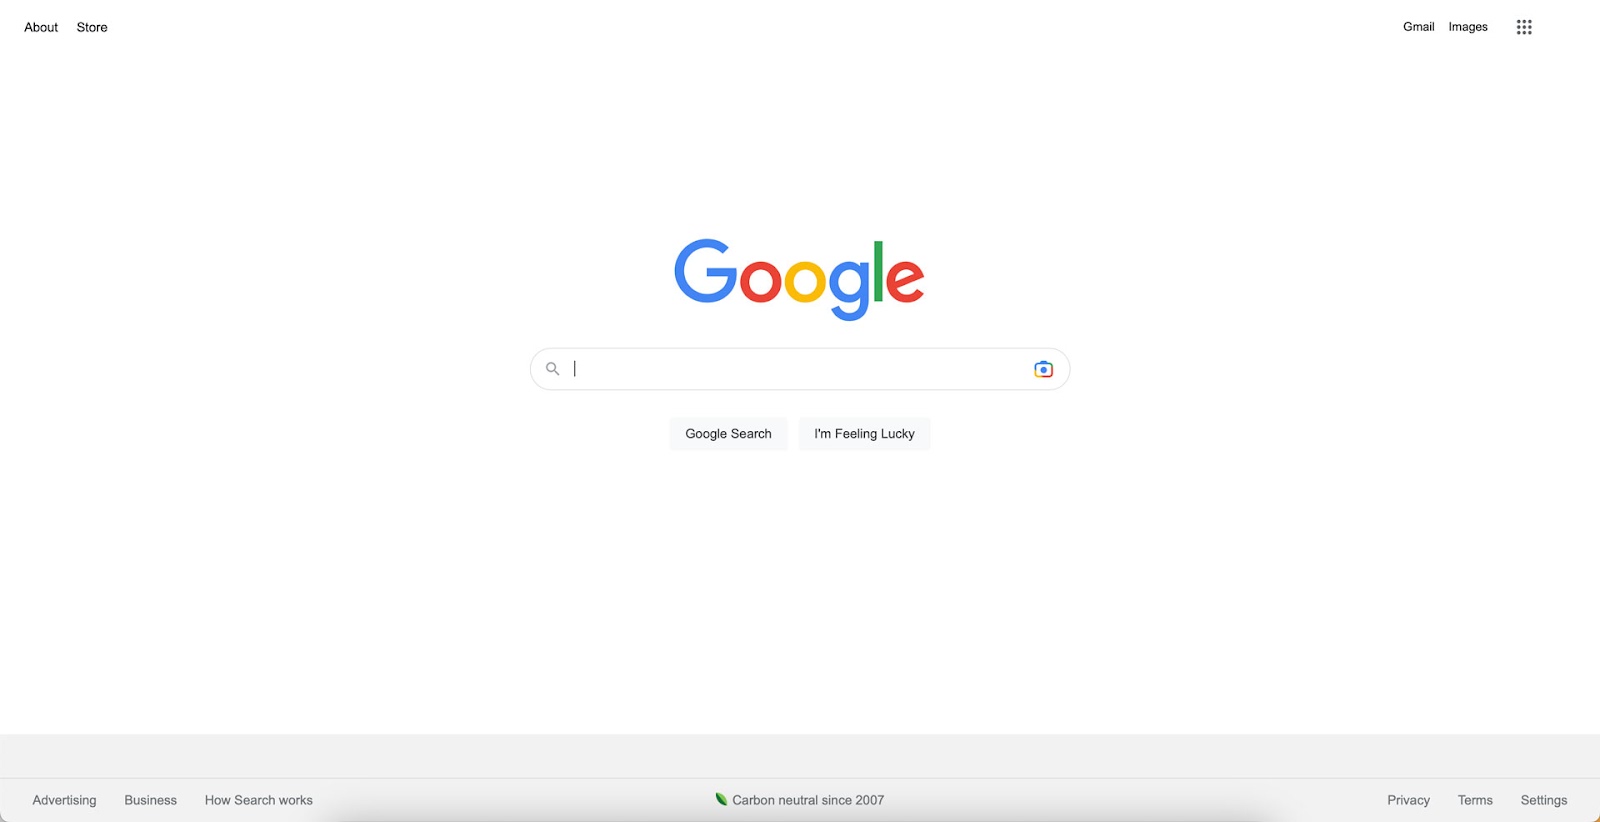 negative space use by Google helps you focus on the most important information